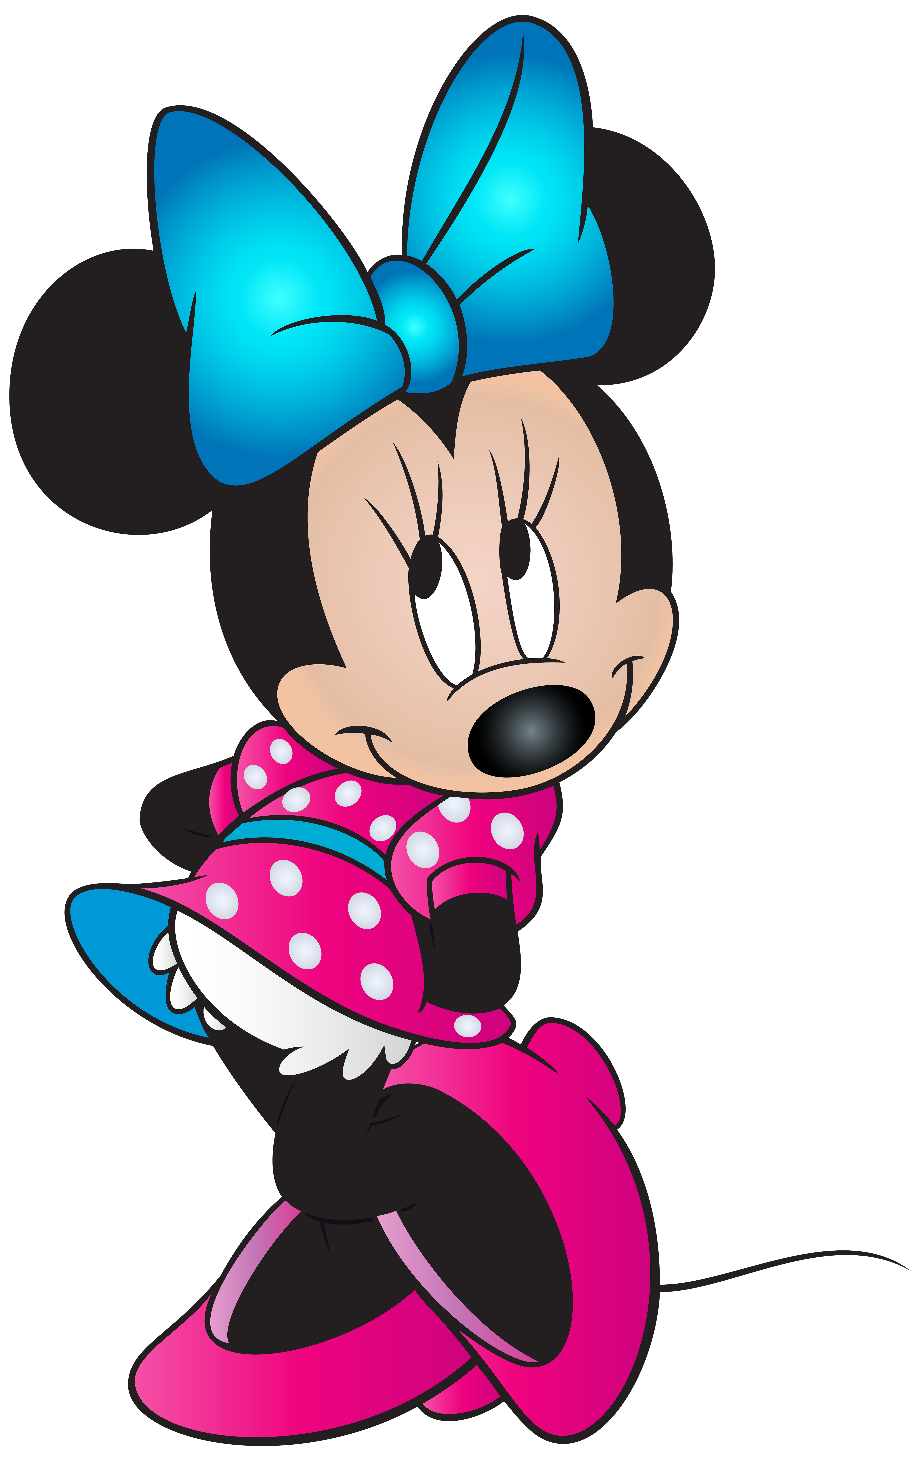 Download High Quality Minnie Mouse Clipart High Resolution Transparent EAA